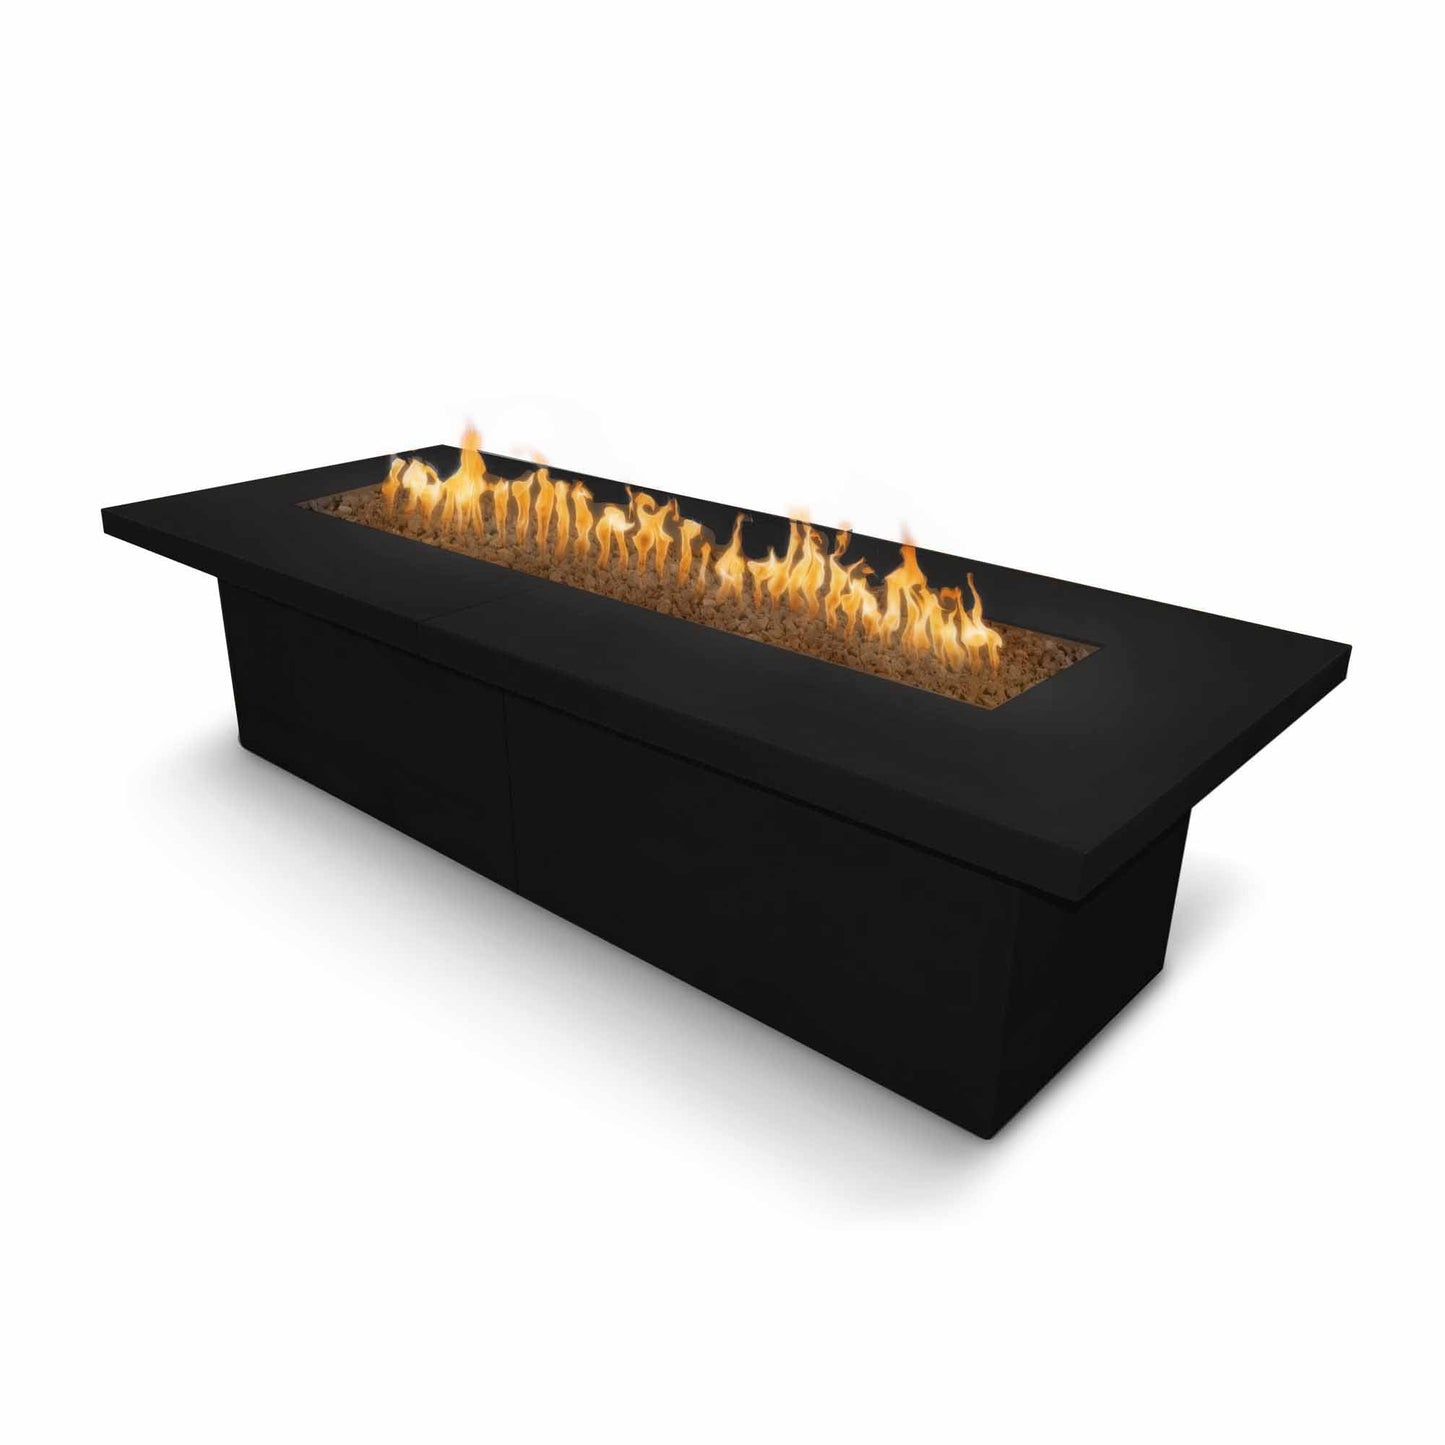 The Outdoor Plus Rectangular Newport 72" Black Powder Coated Metal Liquid Propane Fire Pit with Match Lit with Flame Sense Ignition